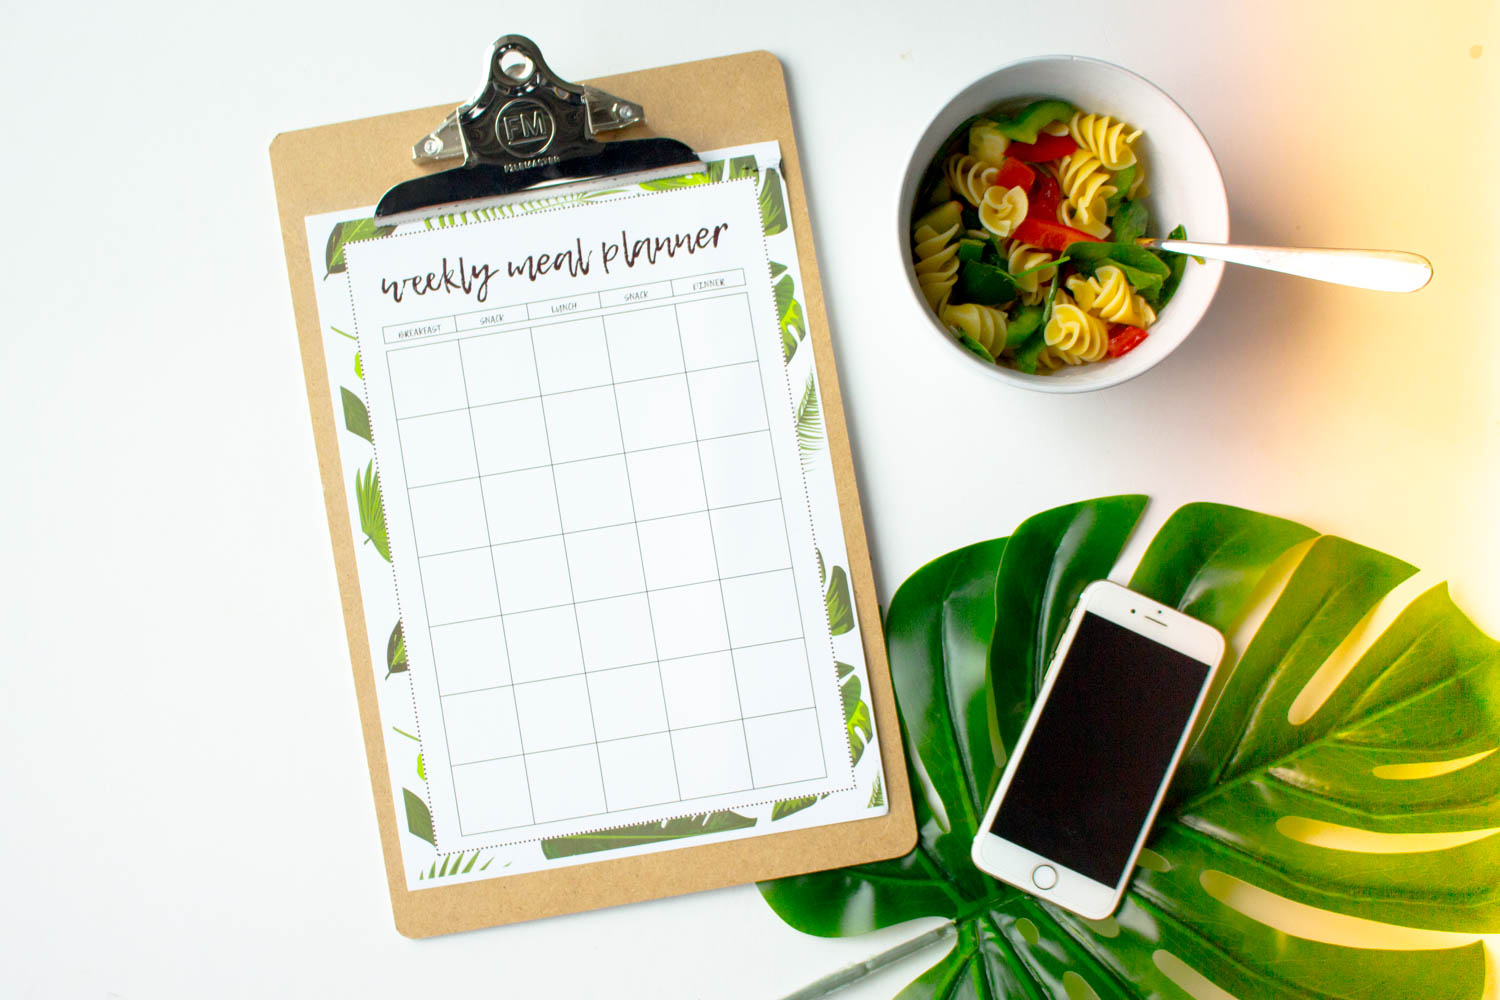 Looking for a printable meal planner that fits 5 small meals? This is the one for you. Download and print within minutes!